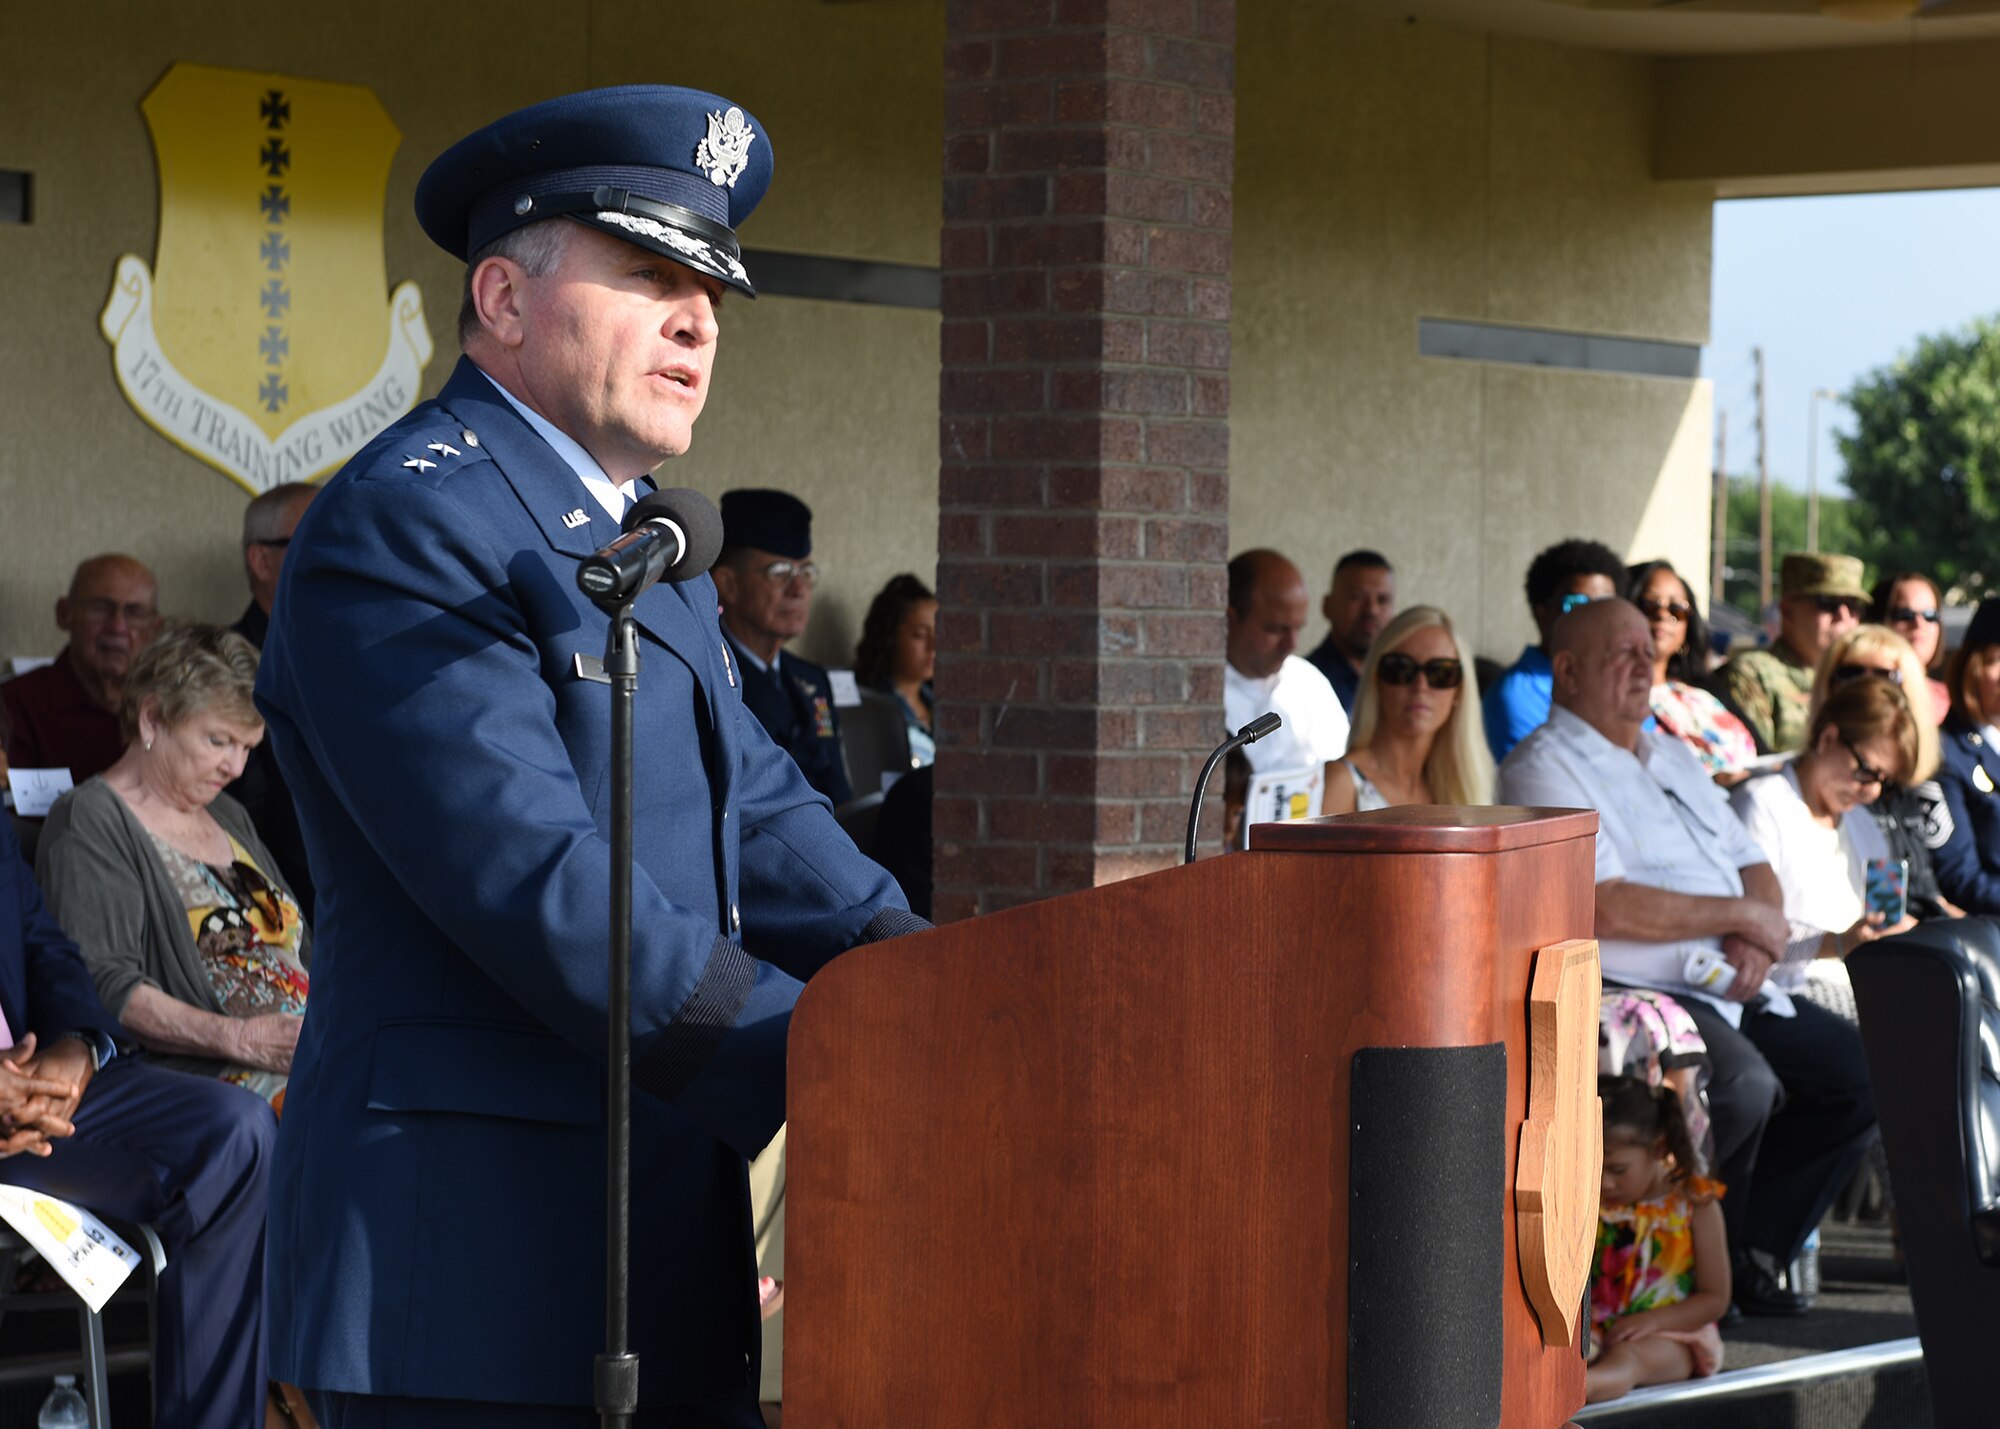 U.S. Air Force Maj. Gen. Timothy Leahy, Second Air Force commander, speaks during the 17th Training Wing change of command ceremony at the parade field on Goodfellow Air Force Base, Texas, June 28, 2019. Leahy presided over the ceremony, in which Col. Ricky Mills relinquished command to Col. Andres Nazario. (U.S. Air Force photo by Staff Sgt. Chad Warren/Released)